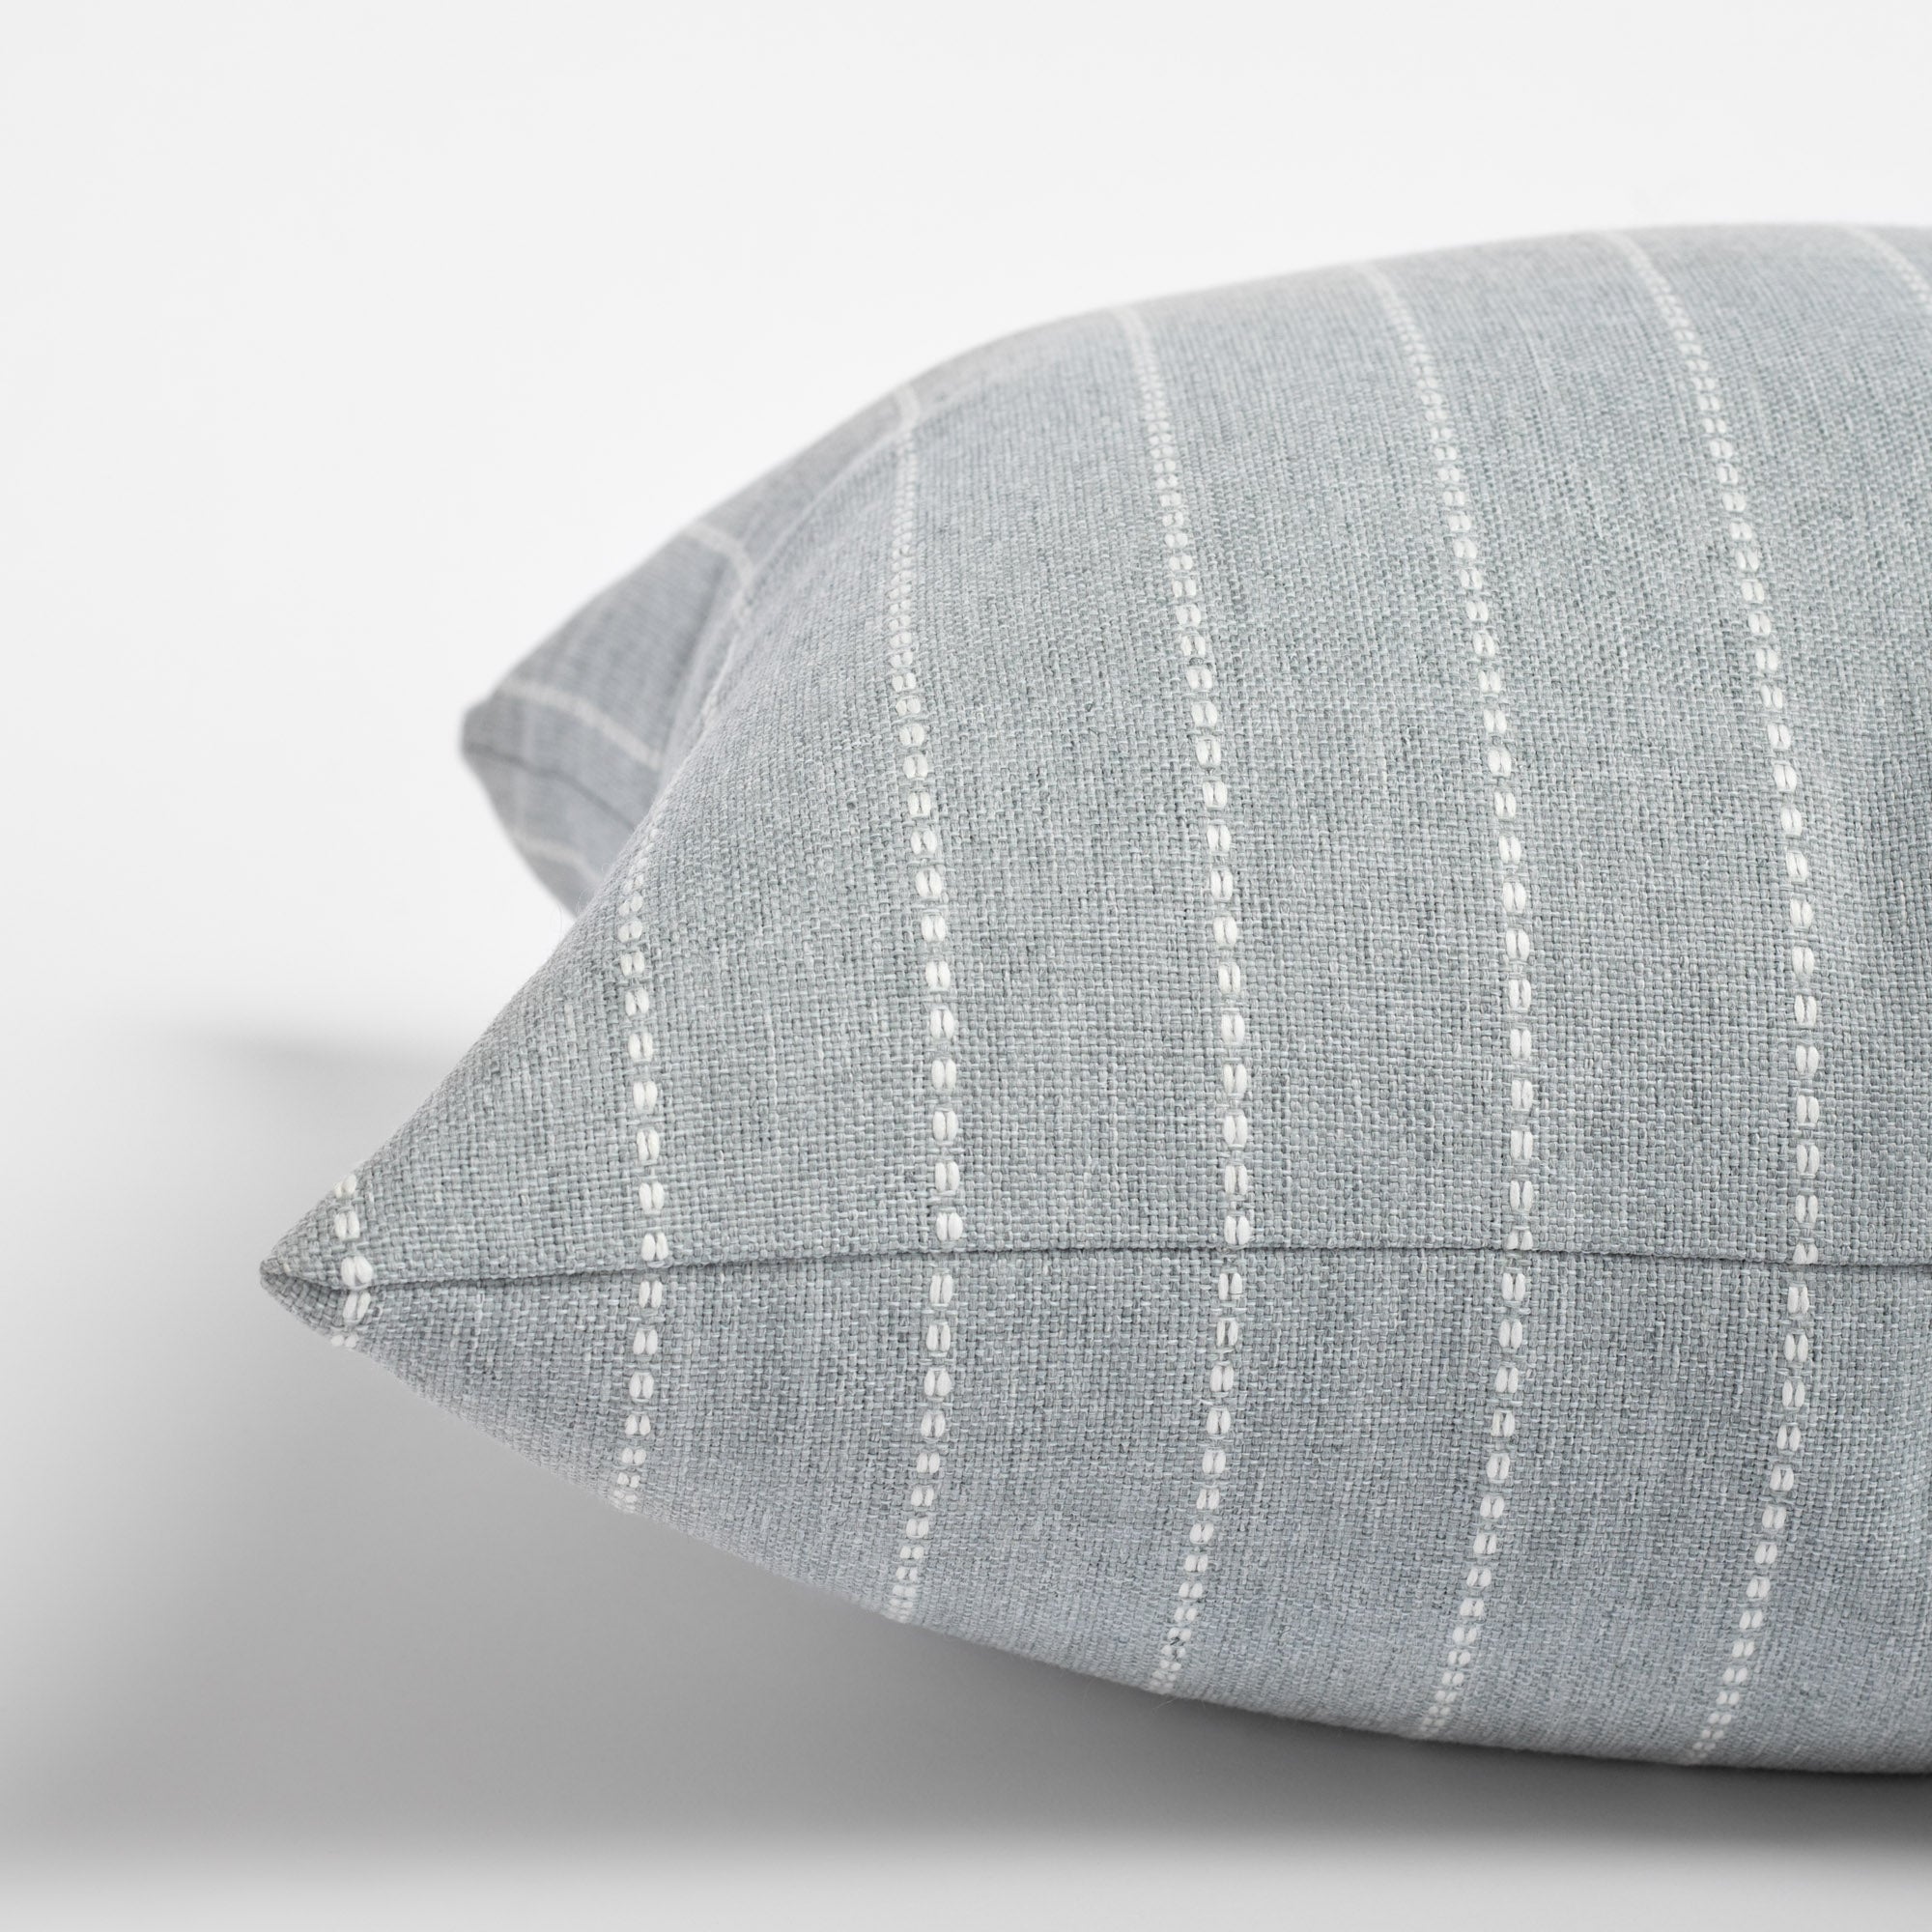 Fontana Cloud 20x20 pillow, a pale blue grey and white vertical stripe indoor outdoor pillow : close up side view